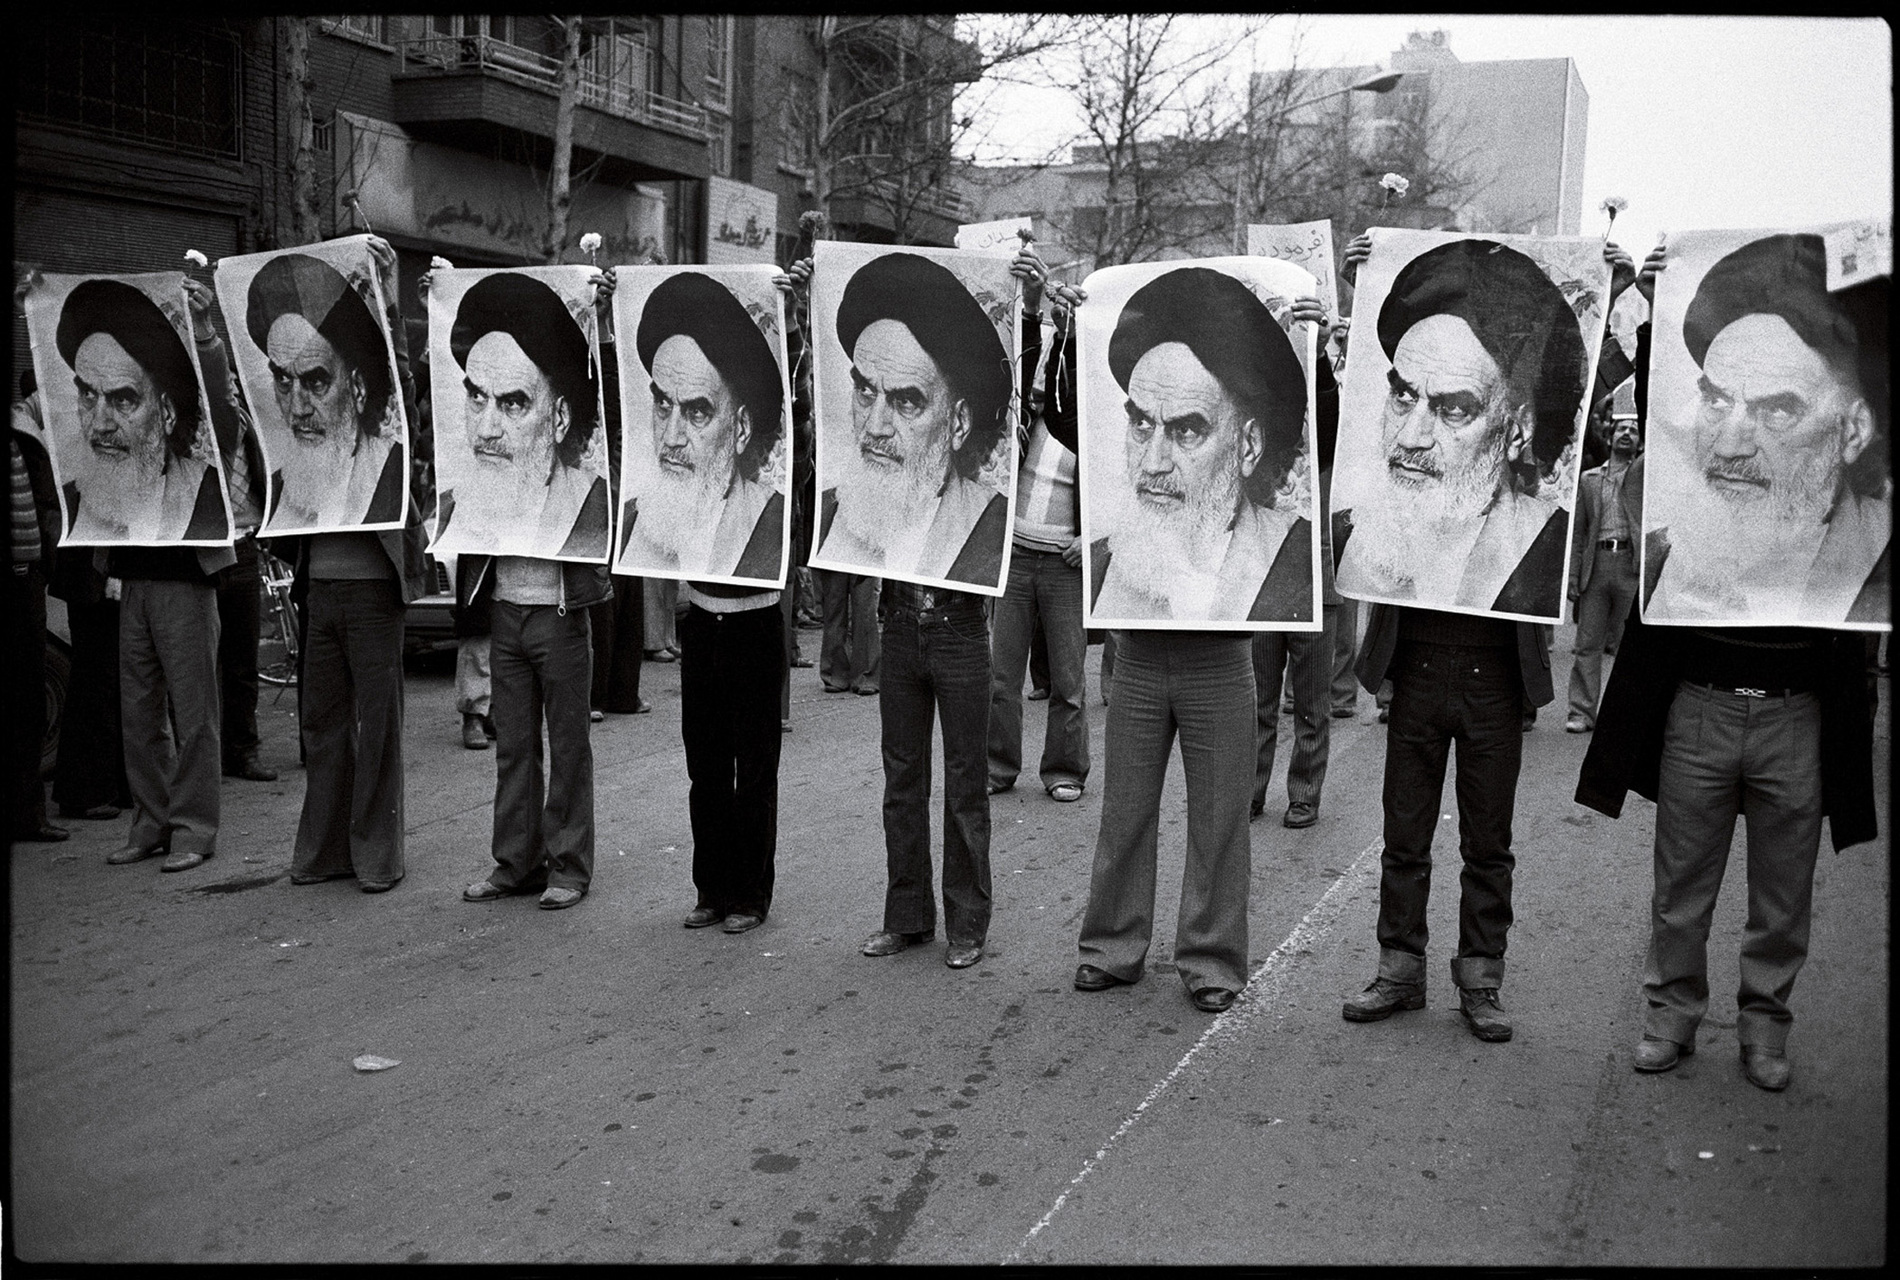 Ayatollah Khomeini posters were present at every anti-Shah rally.